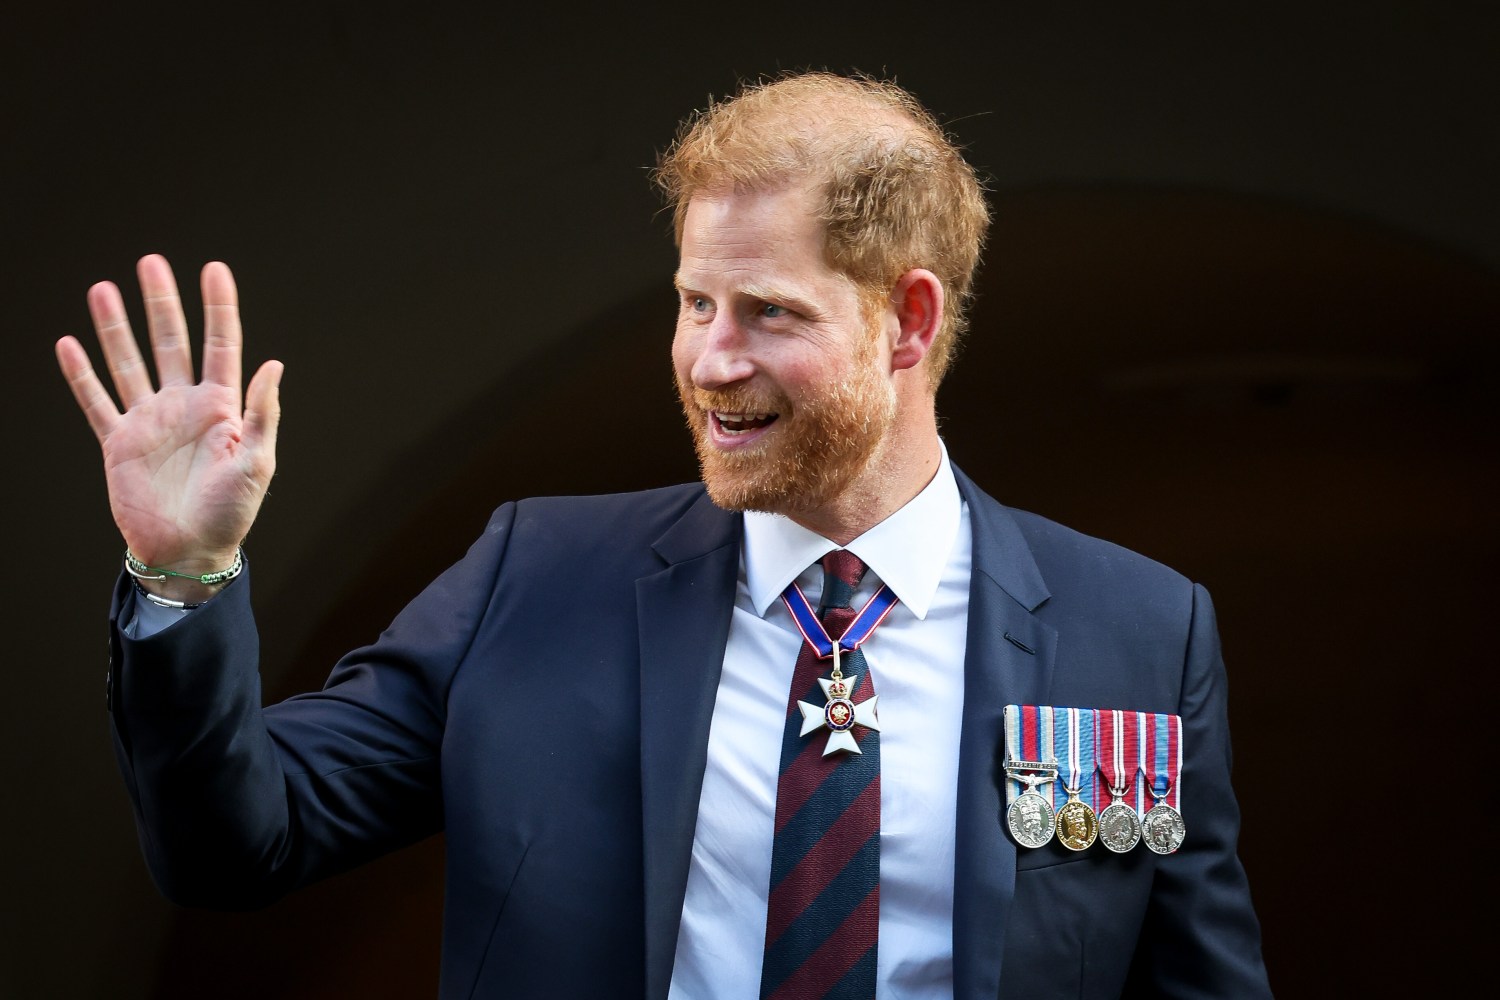 Prince Harry, The Duke of Sussex, at The Invictus Games